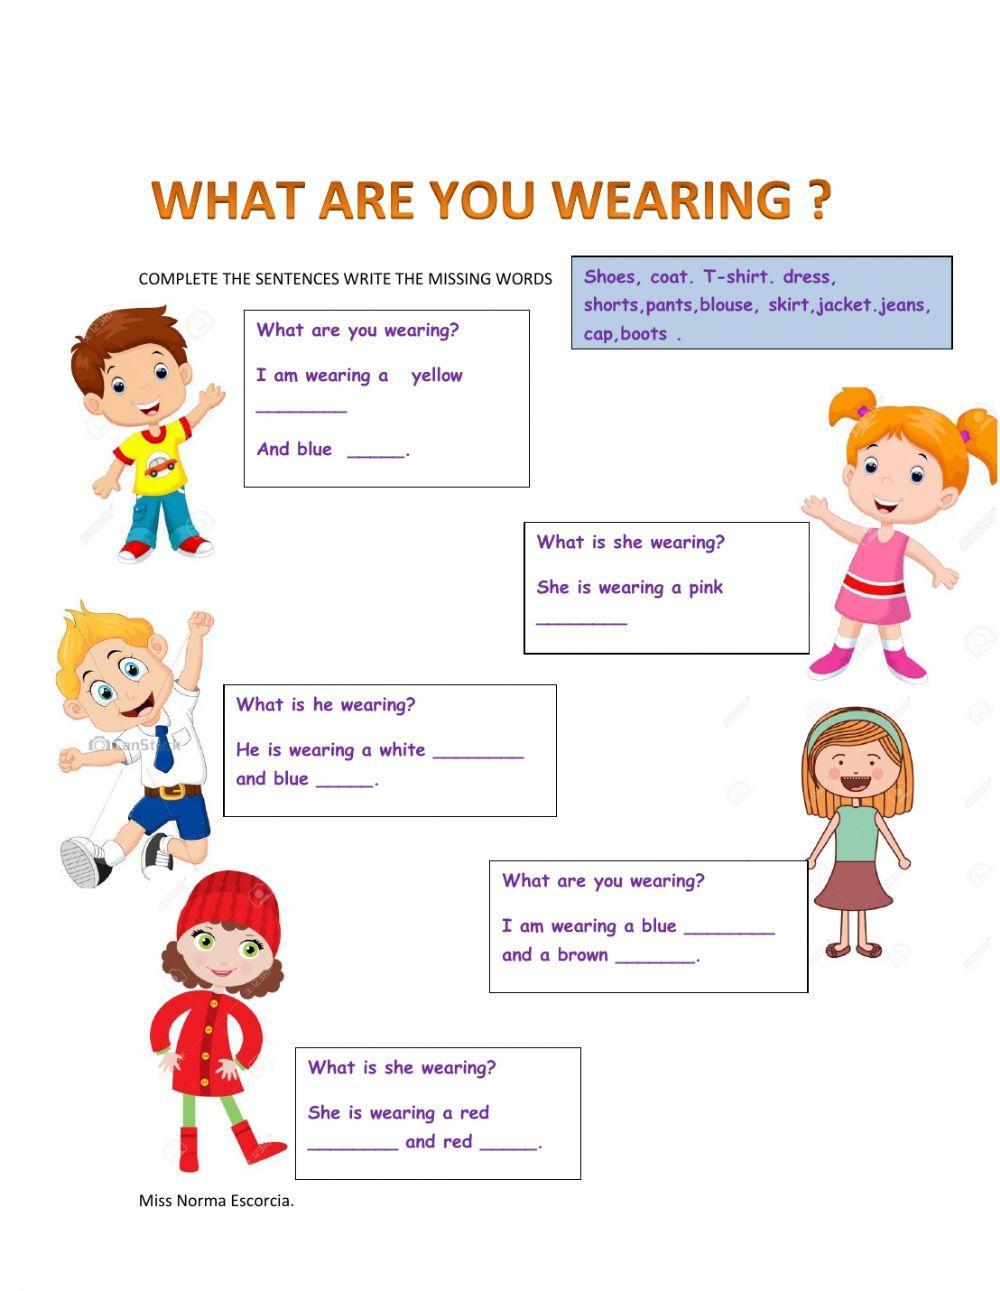 What are they wearing? interactive exercise for beginners